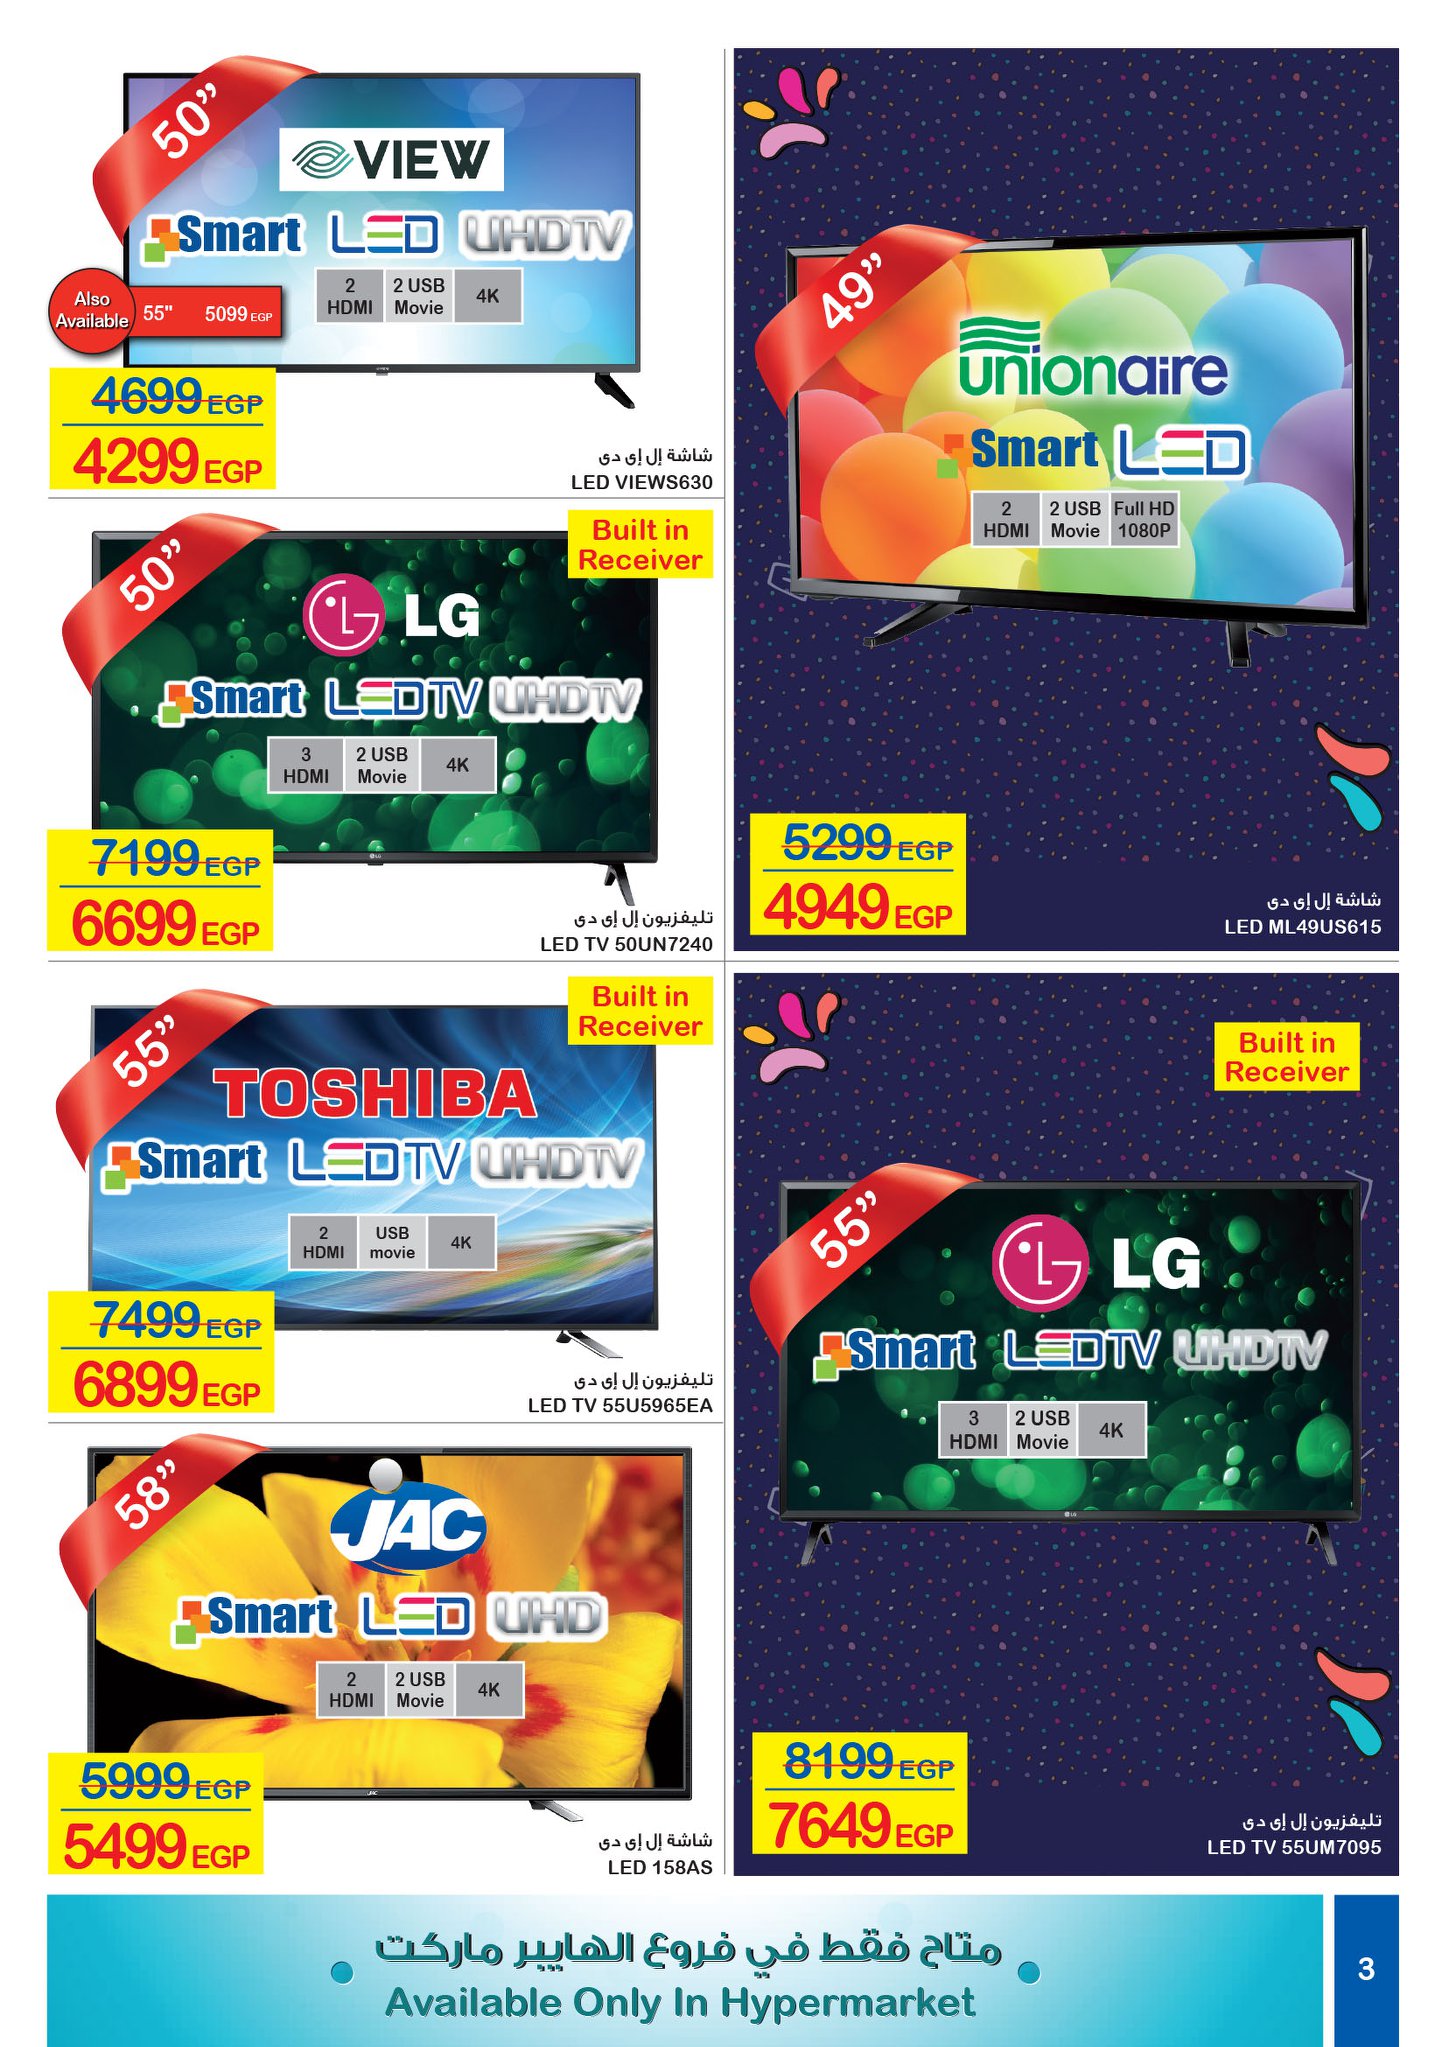 Carrefour Flyer from 16/7 till 27/7 | Carrefour Egypt 3